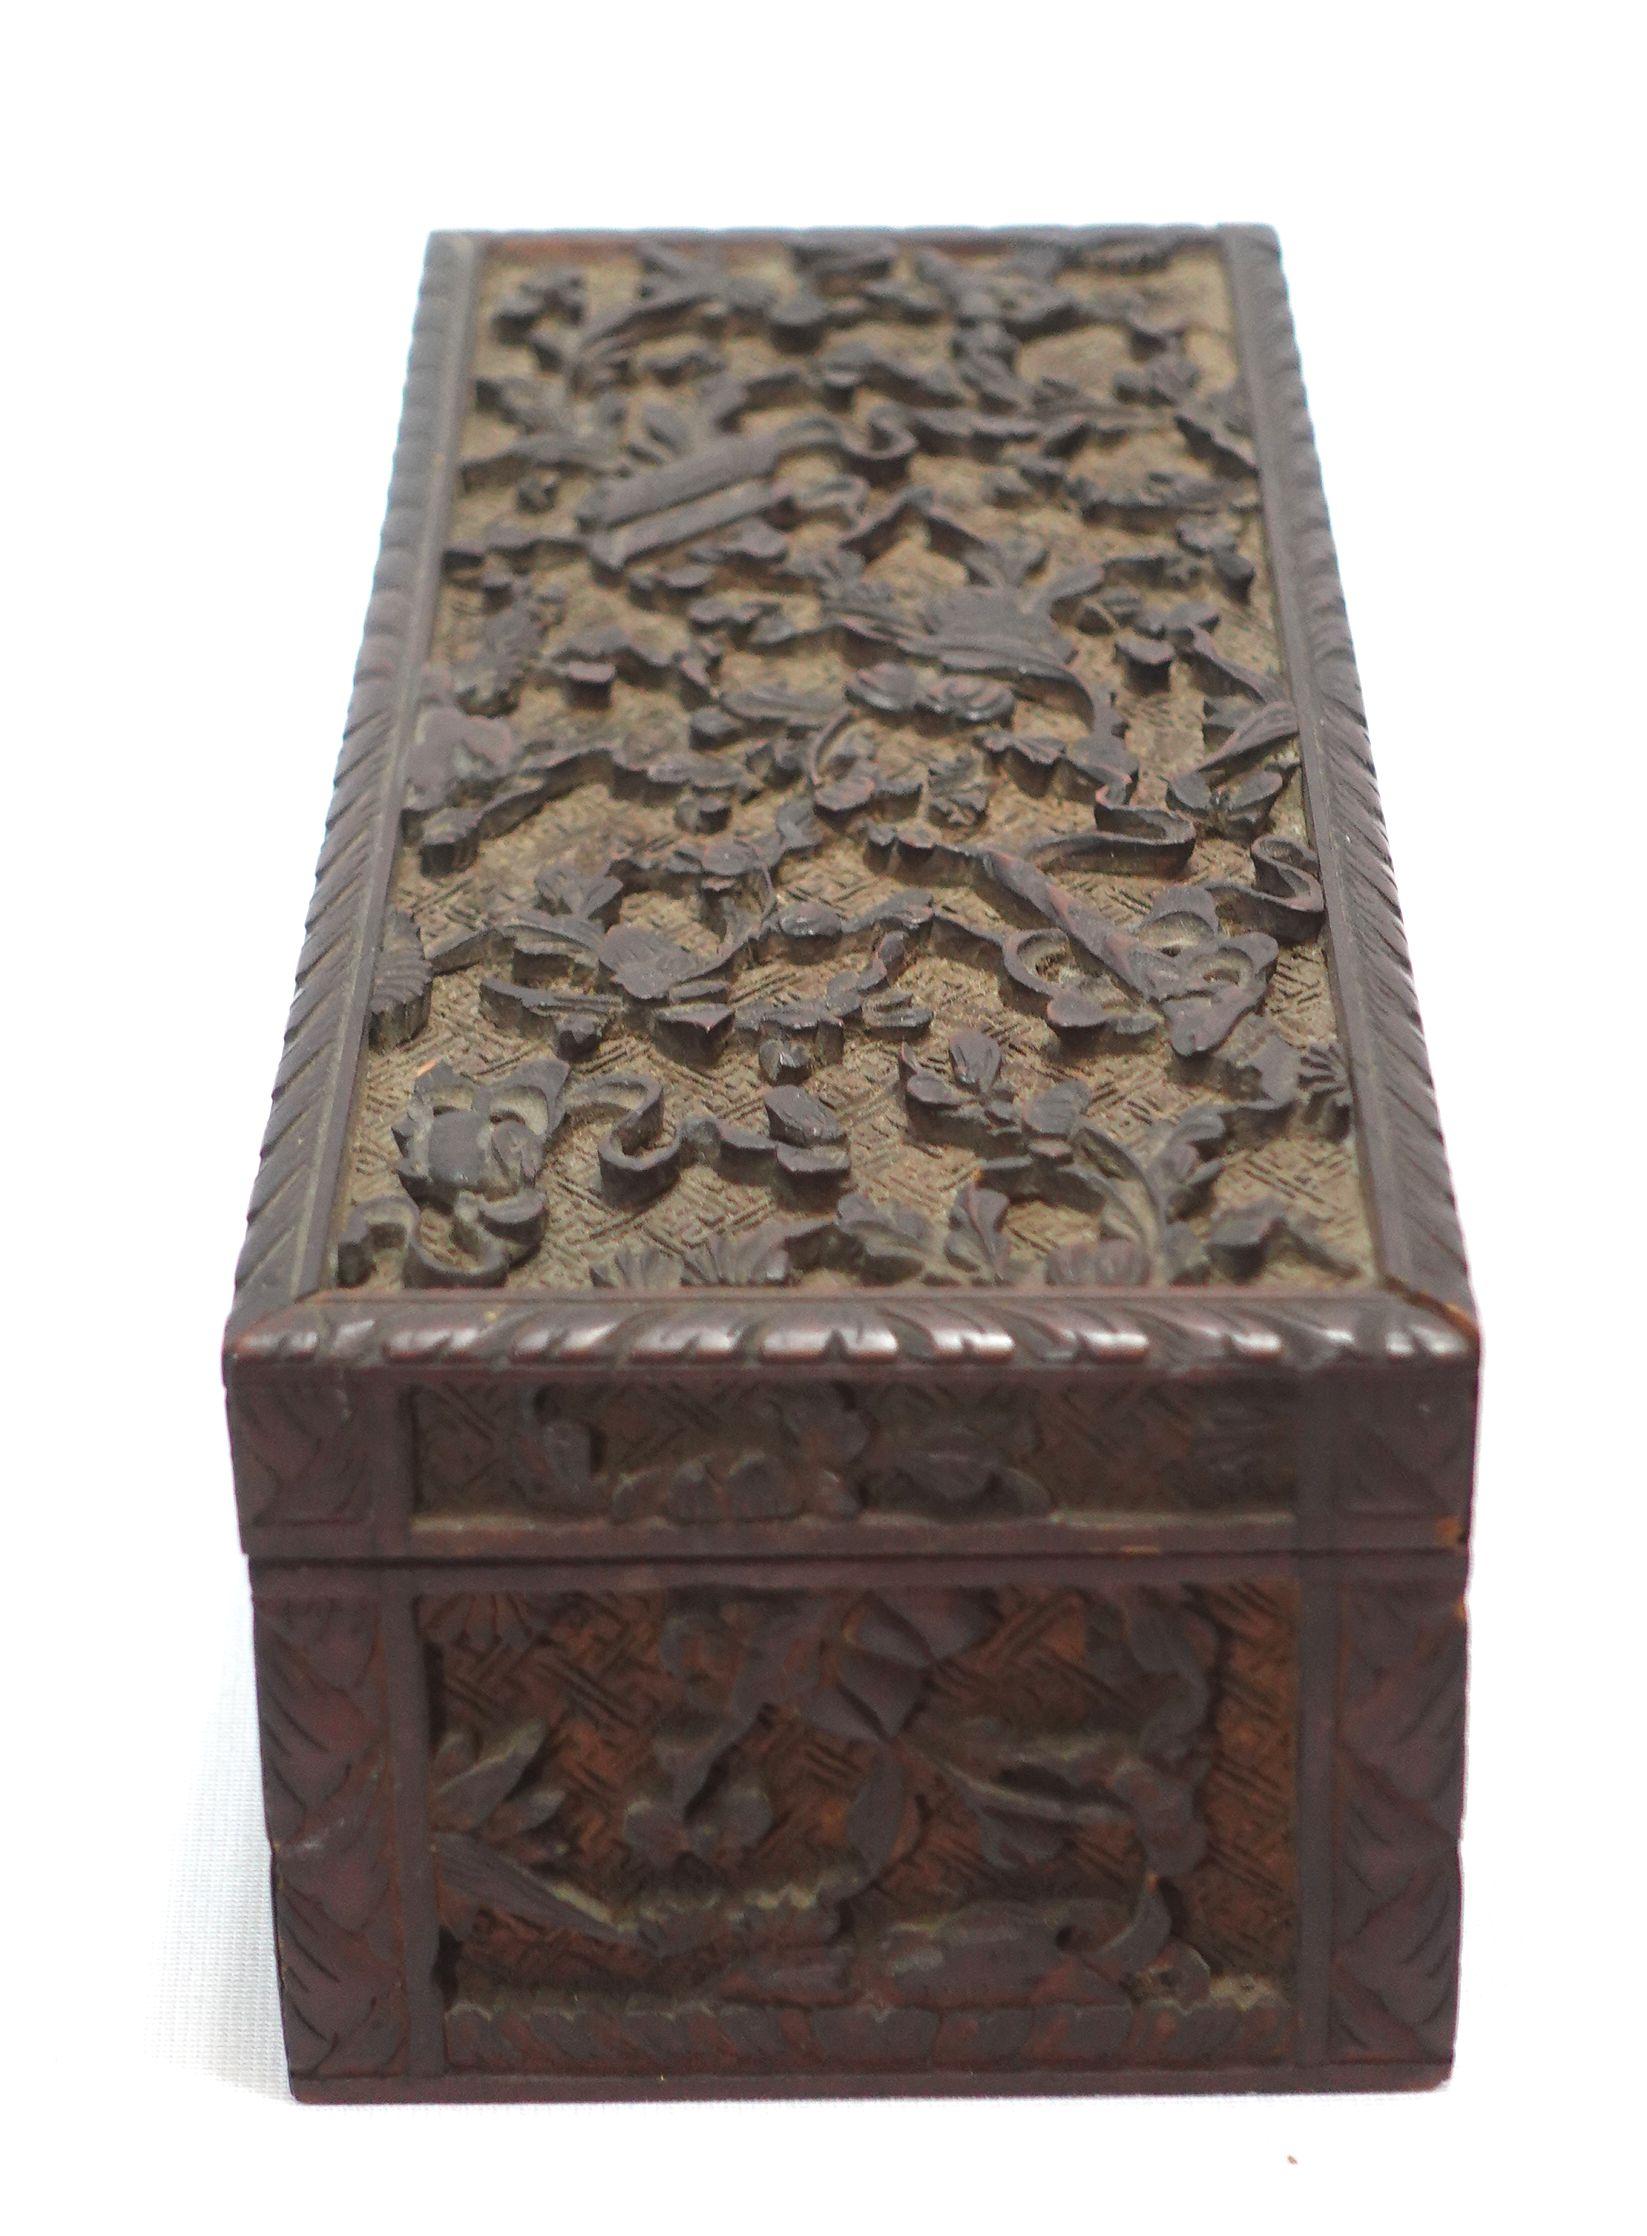 Antique Chinese Elaborately Relief Carved Glove Box W/ Original Hinges and Lock For Sale 3